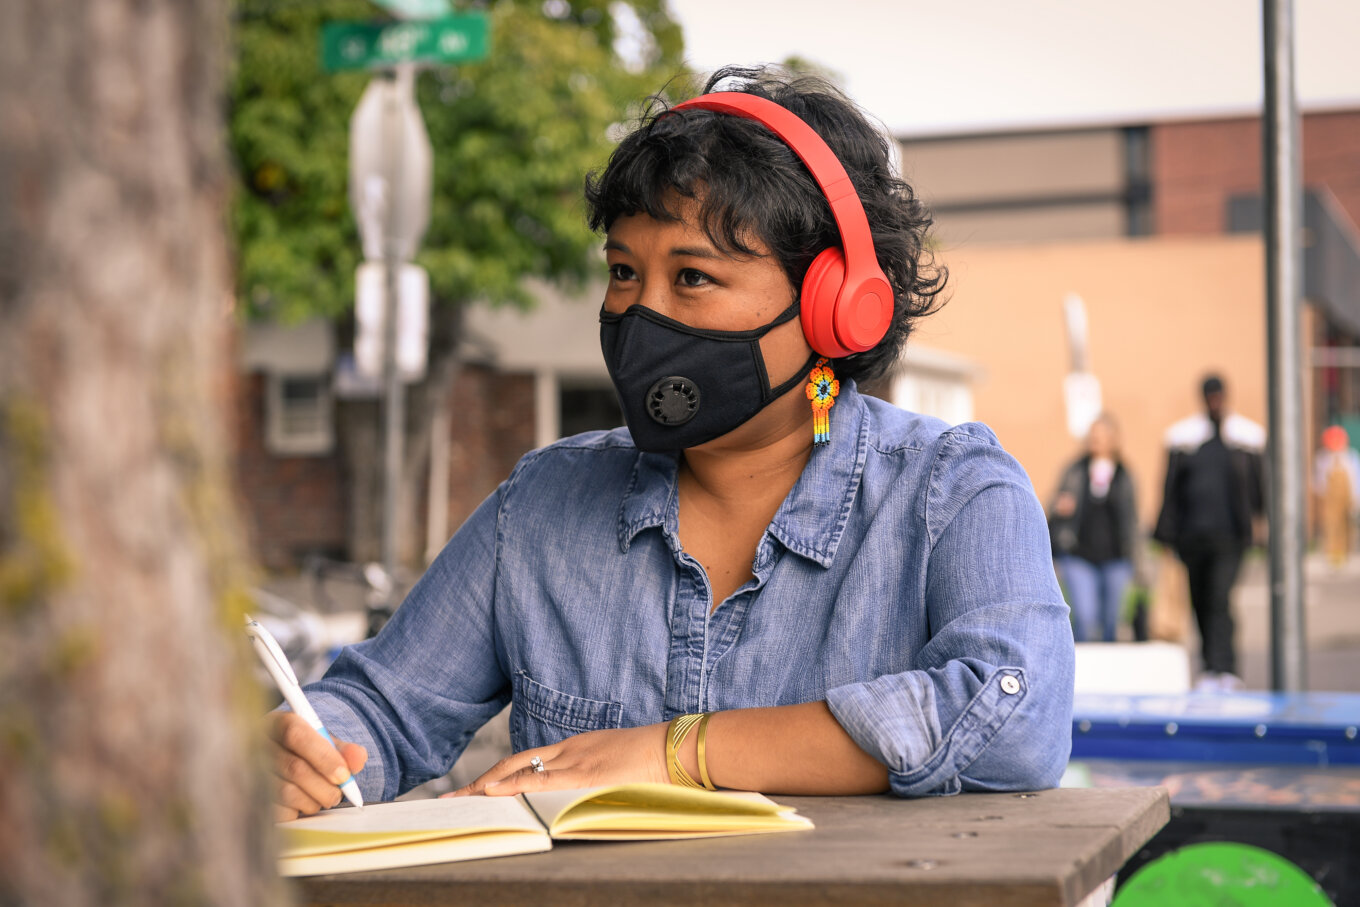 A person wearing a face mask and headphones